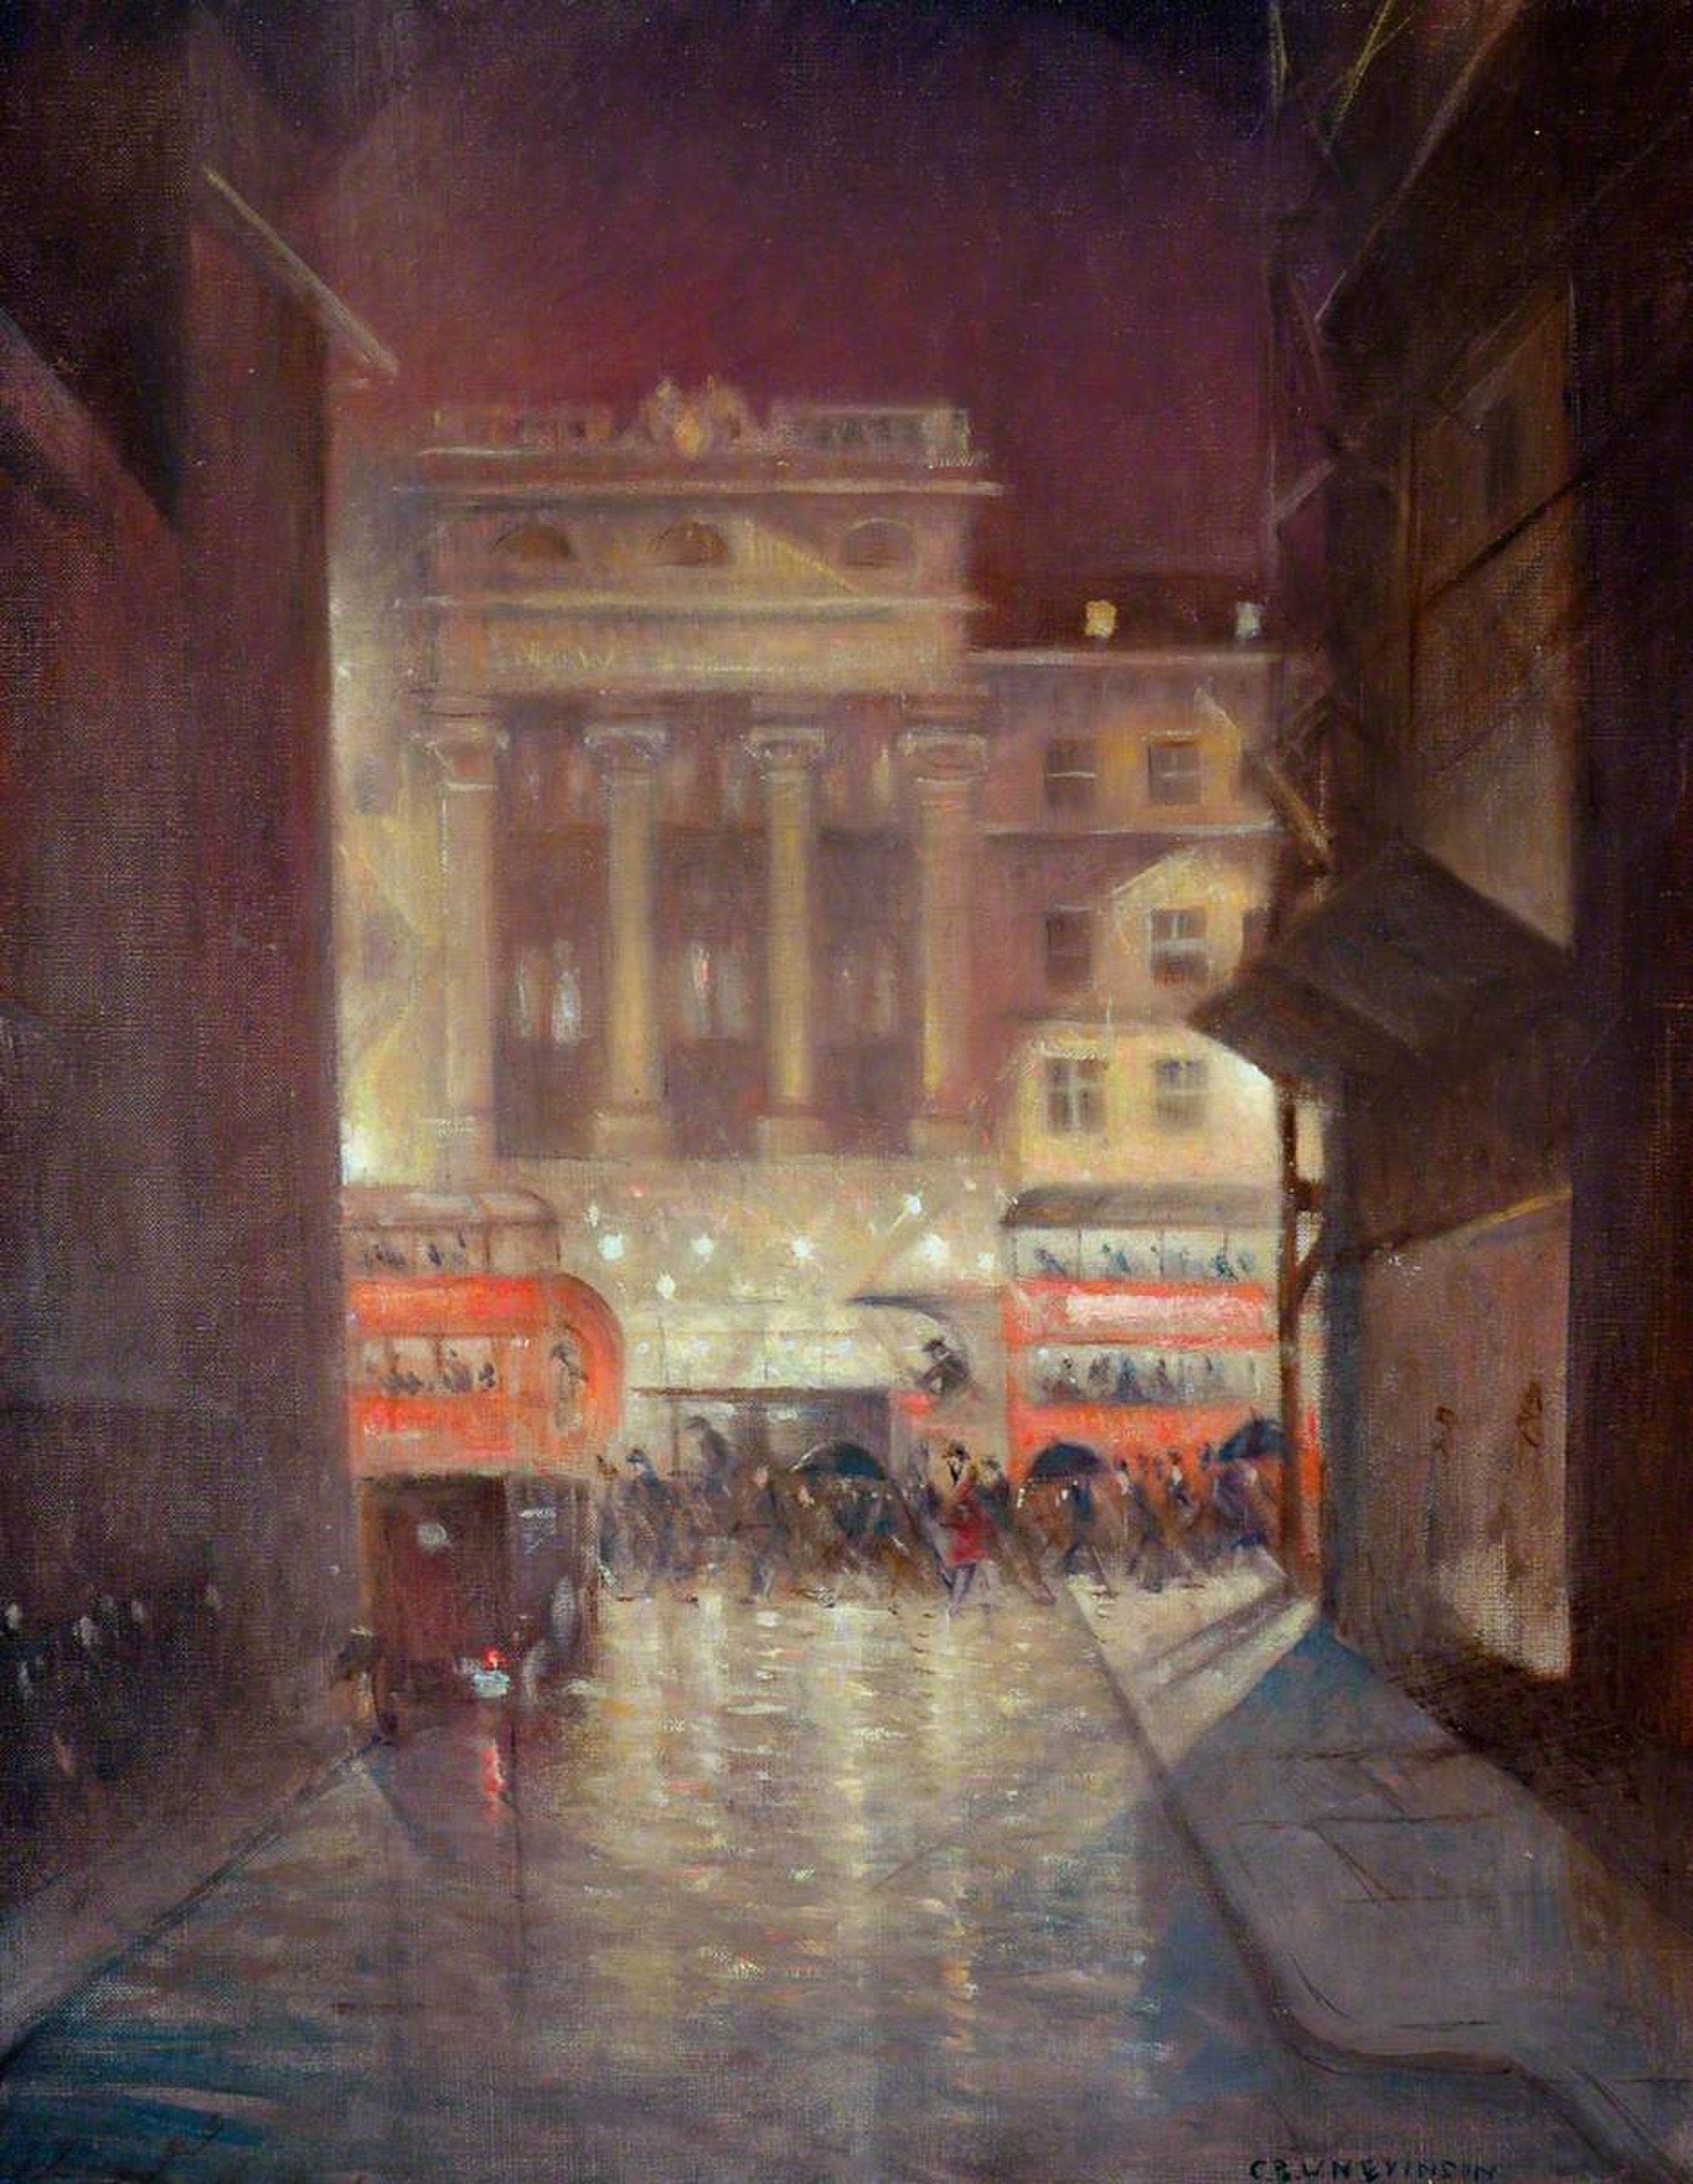 The Strand by Night art print (London, 1937) | Christopher R. W. Nevinson  The Trumpet Shop   